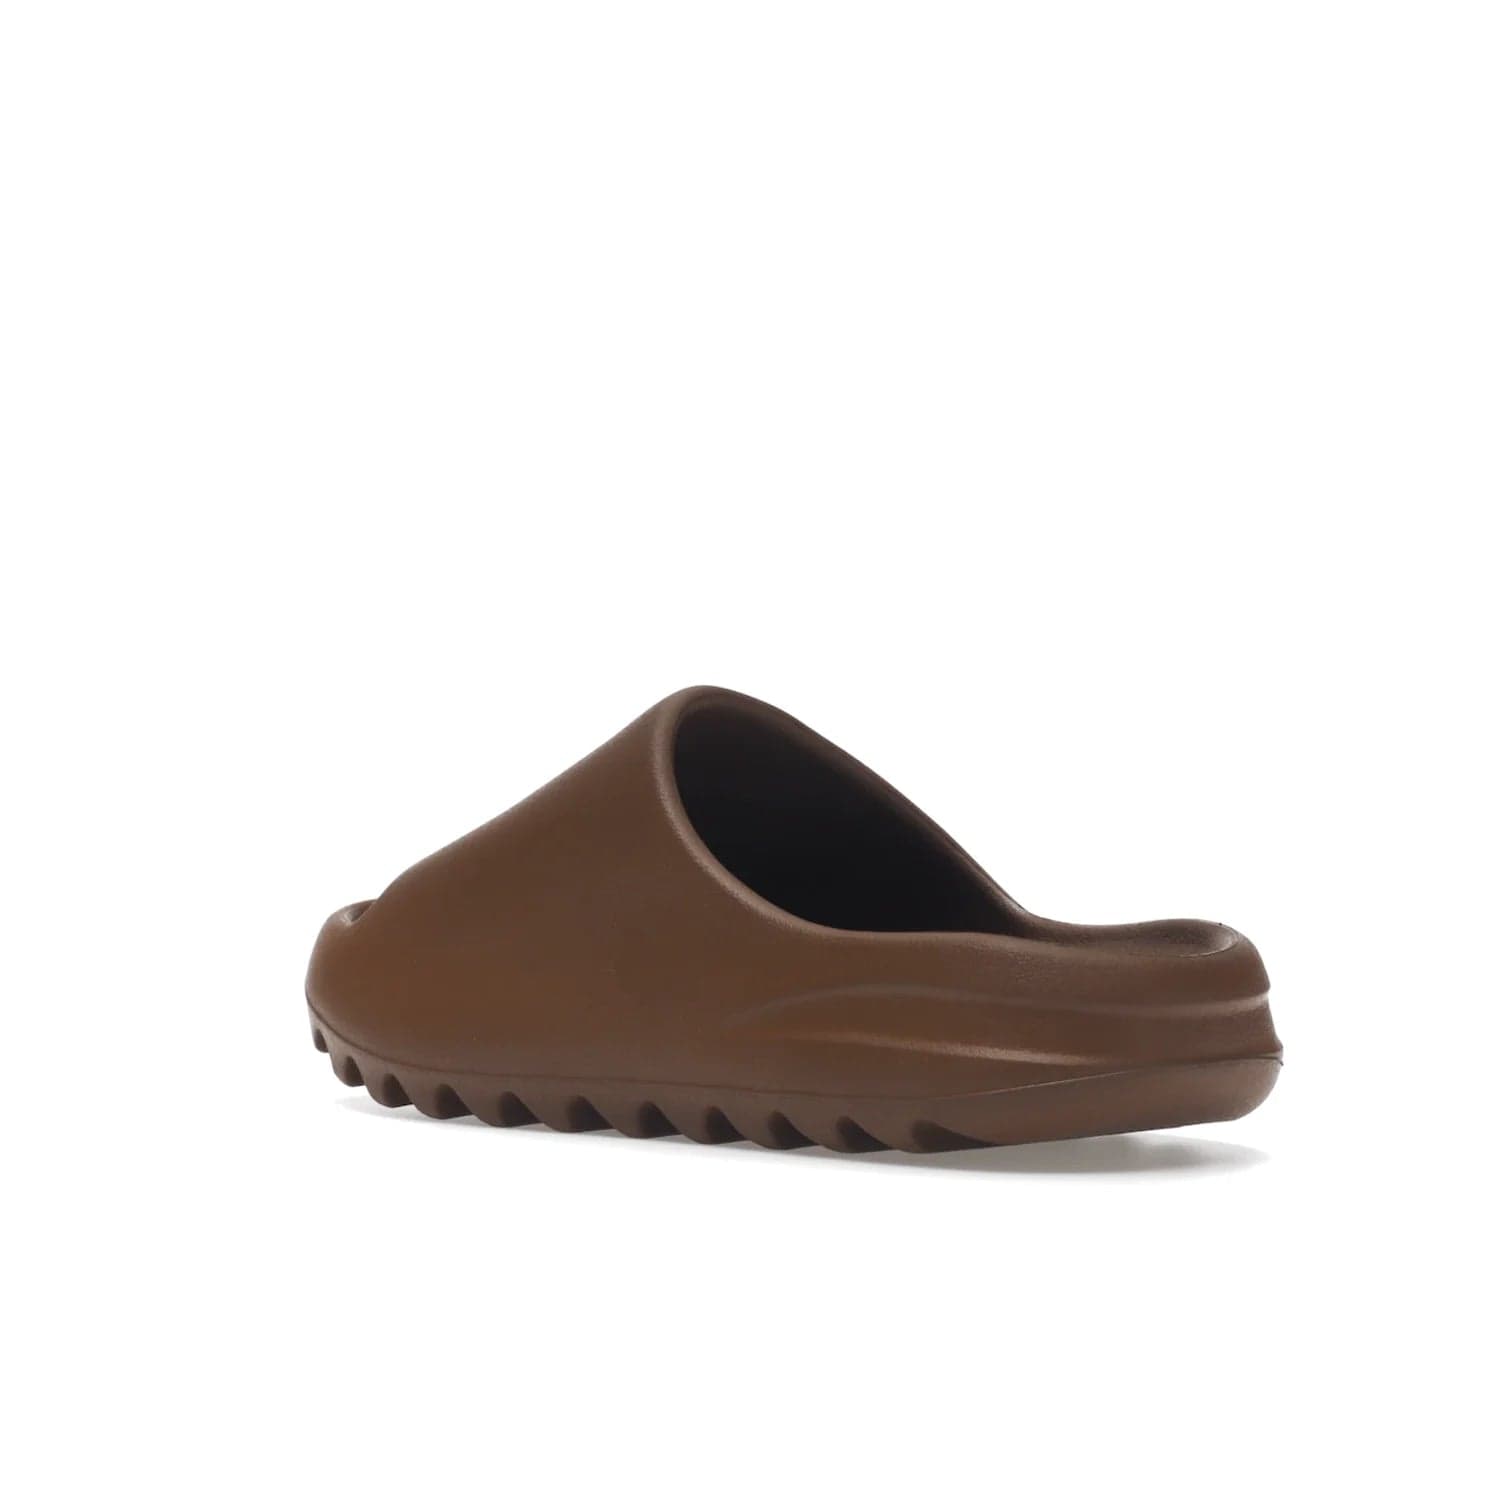 adidas Yeezy Slide Flax - Image 24 - Only at www.BallersClubKickz.com - Score the perfect casual look with the adidas Yeezy Slide Flax. Made with lightweight injected EVA plus horizontal grooves underfoot for traction. Release on August 22, 2022. $70.